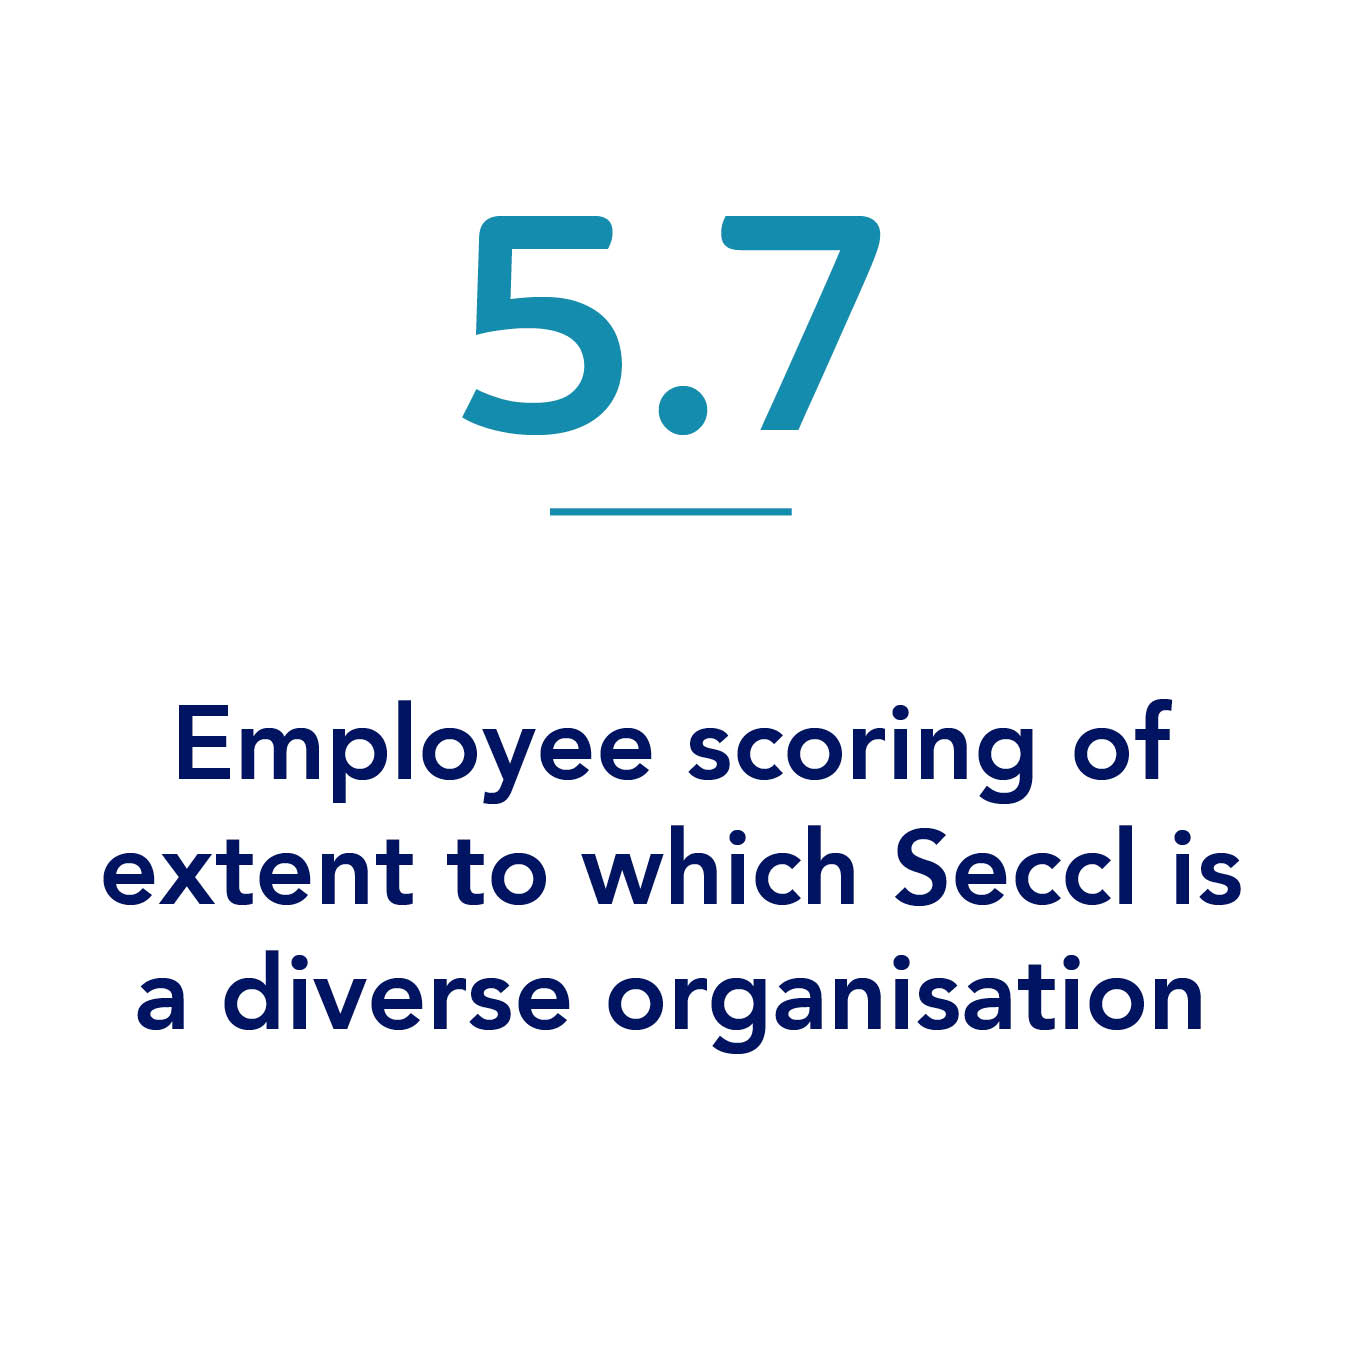 5.7 employee scoring of extent to which Seccl is a diverse organisation